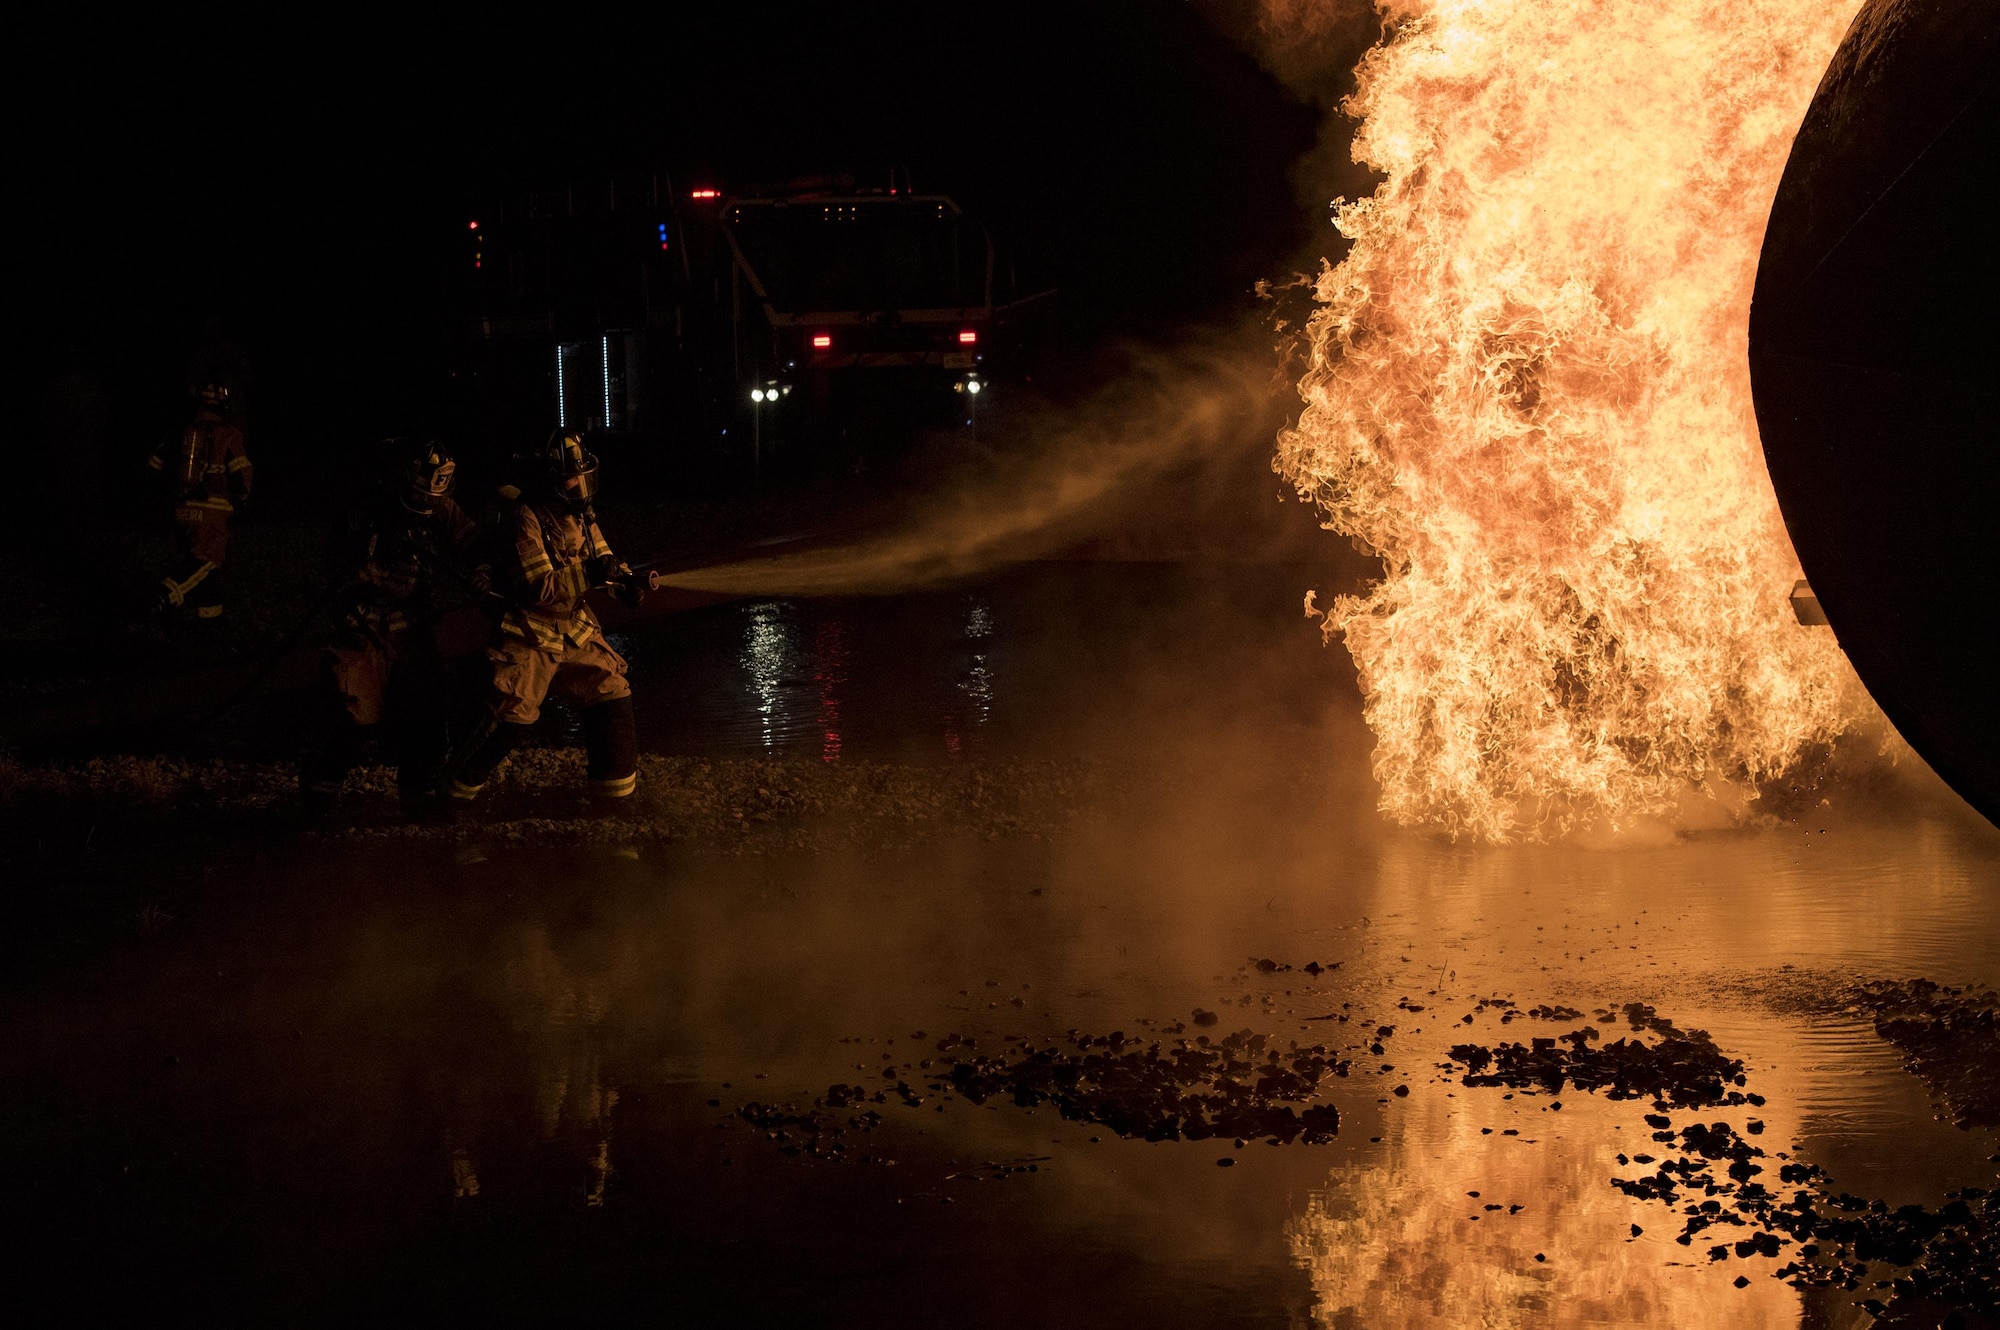 Firefighters from the 23d Civil Engineer Squadron team up to extinguish flames during nighttime, live-fire training, Jan. 10, 2017, at Moody Air Force Base, Ga. The prop aircraft fires were propane-controlled by the fire department’s assistant chief of training, Charlie Johnson. (U.S. Air Force photo by Airman 1st Class Daniel Snider)